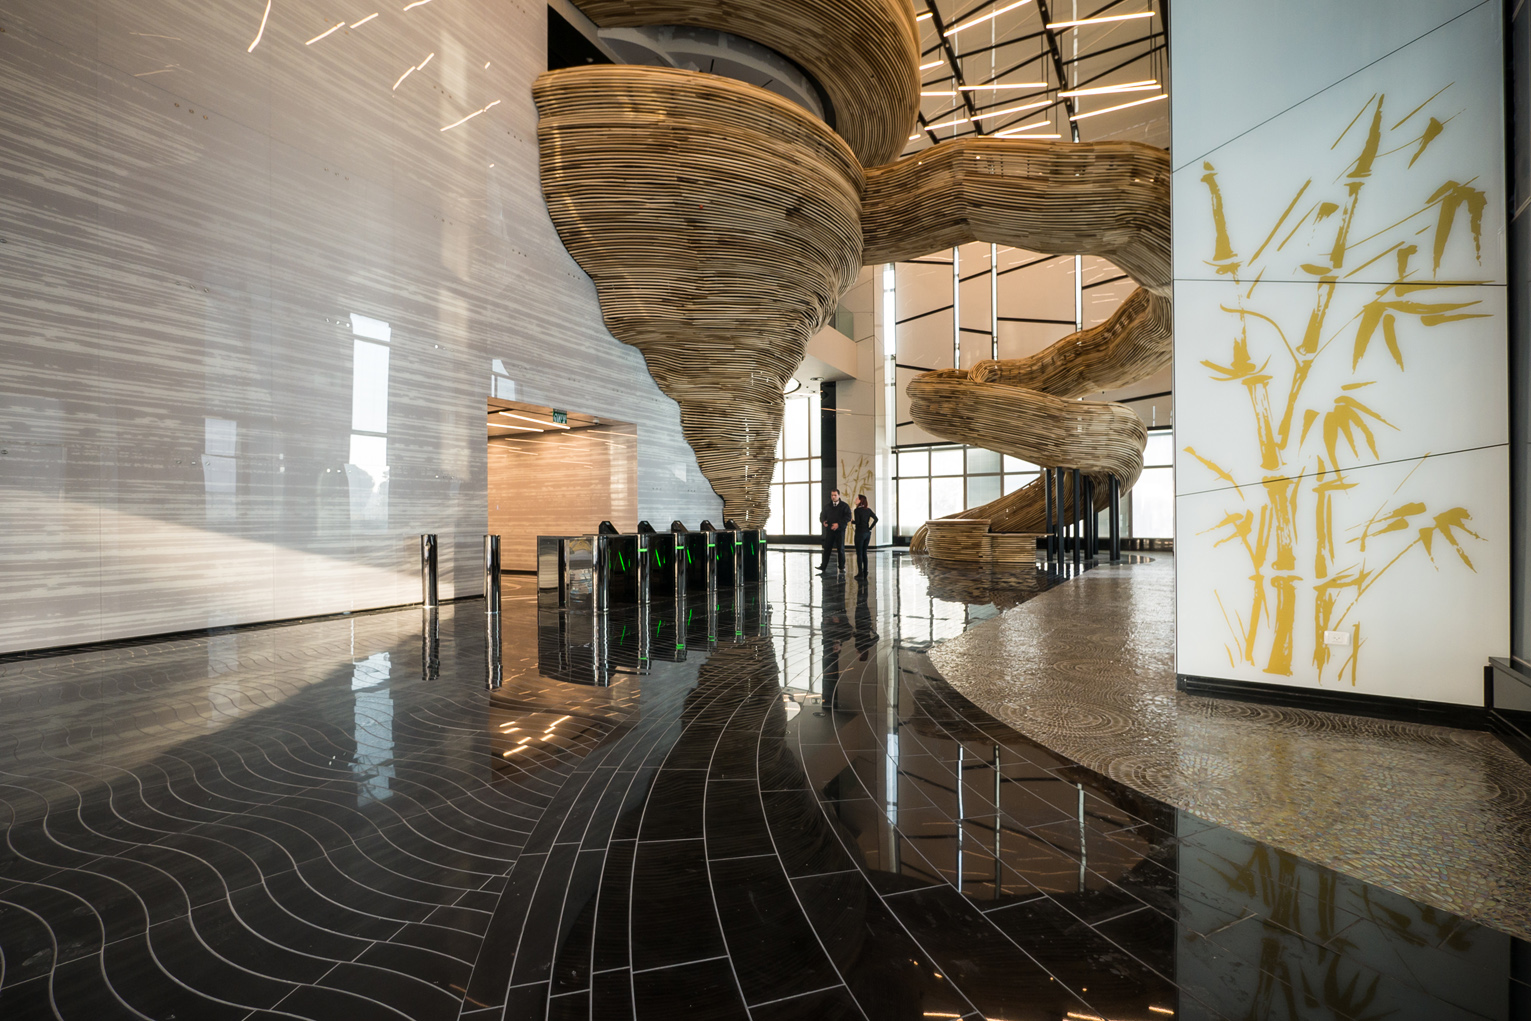 The stair structure is composed of two sculptural elements: the spiraling stairs and a tornado-like element, which seem to emerge from the reflecting walls of the entrance lobby.